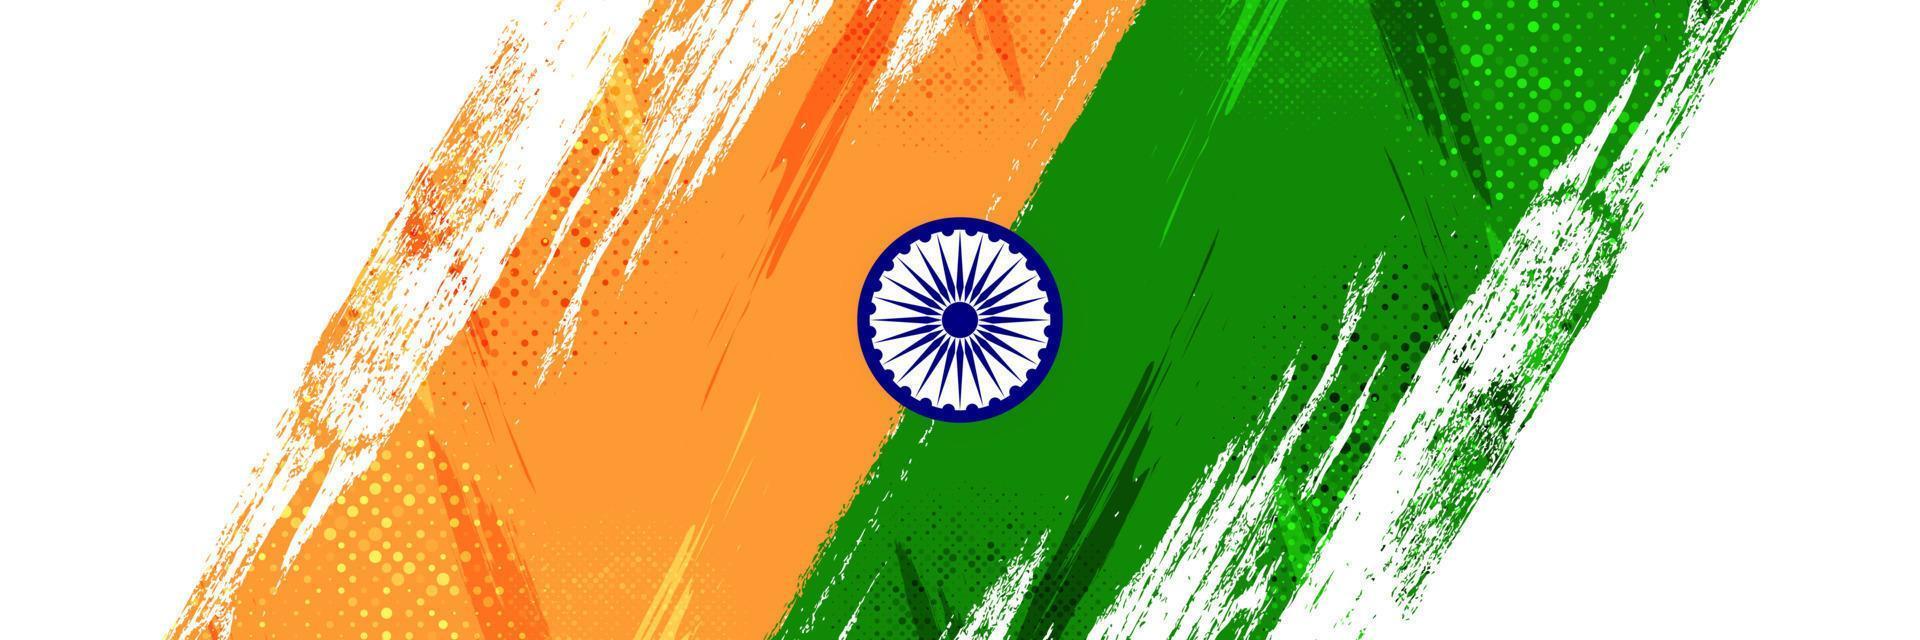 India Flag Background with Brush Style and Halftone Effect. Indian Tricolor National Flag Illustration with Grunge Concept vector